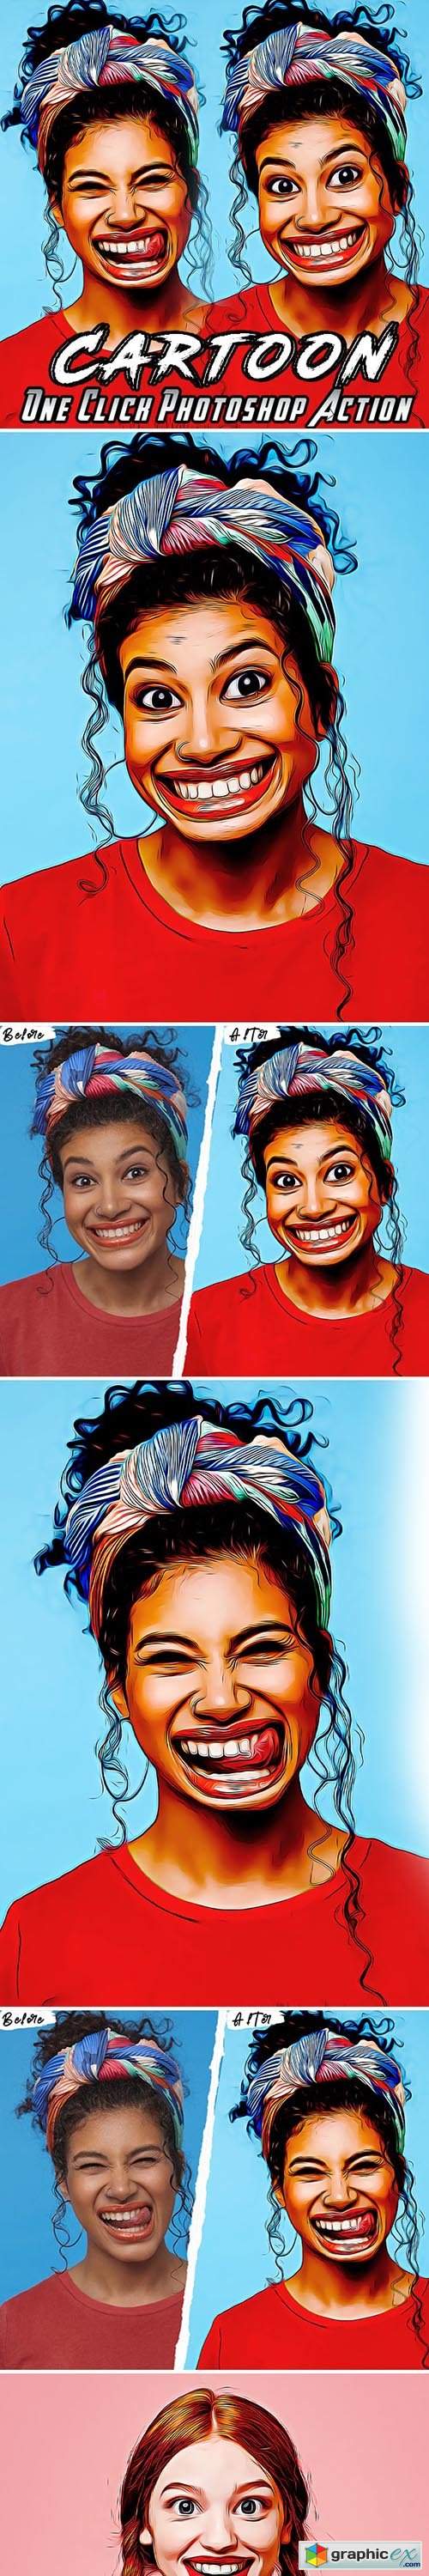 Caricature Cartoon Photoshop Action » Free Download Vector Stock Image  Photoshop Icon